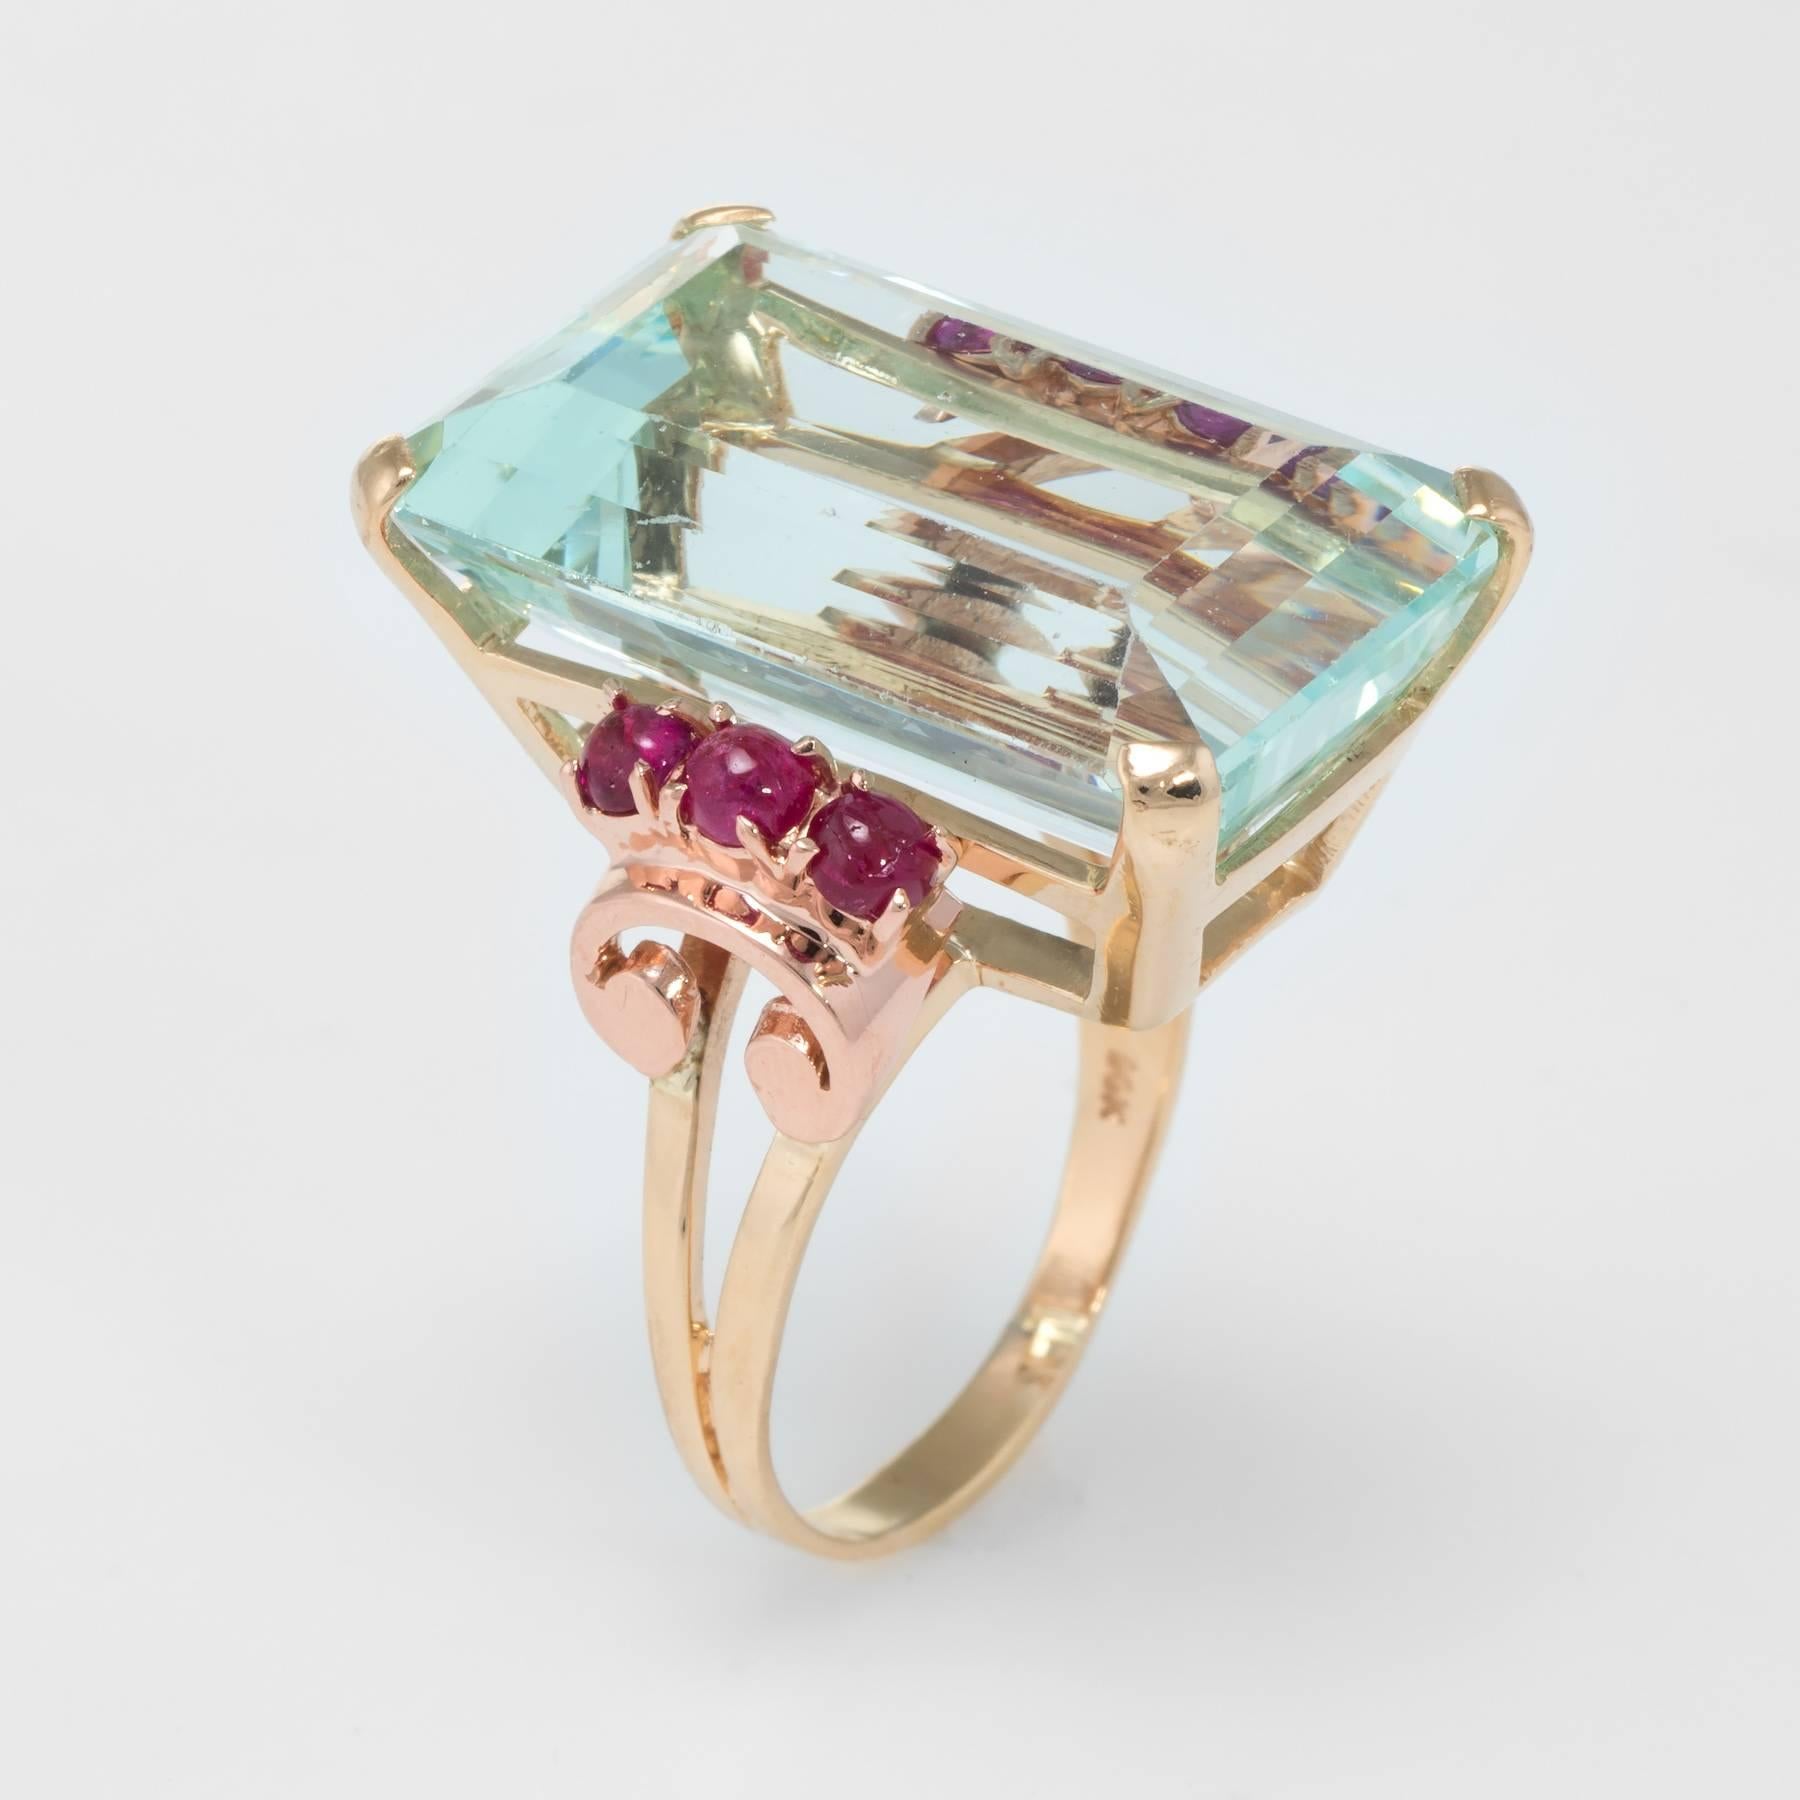 Bold and stylish retro cocktail ring (circa 1940s to 1950s), crafted in 14 karat yellow gold with rose gold accents. 

Centrally mounted emerald cut aquamarine measures 25mm x 16mm and is estimated at 40 carats, accented with an estimated 0.50